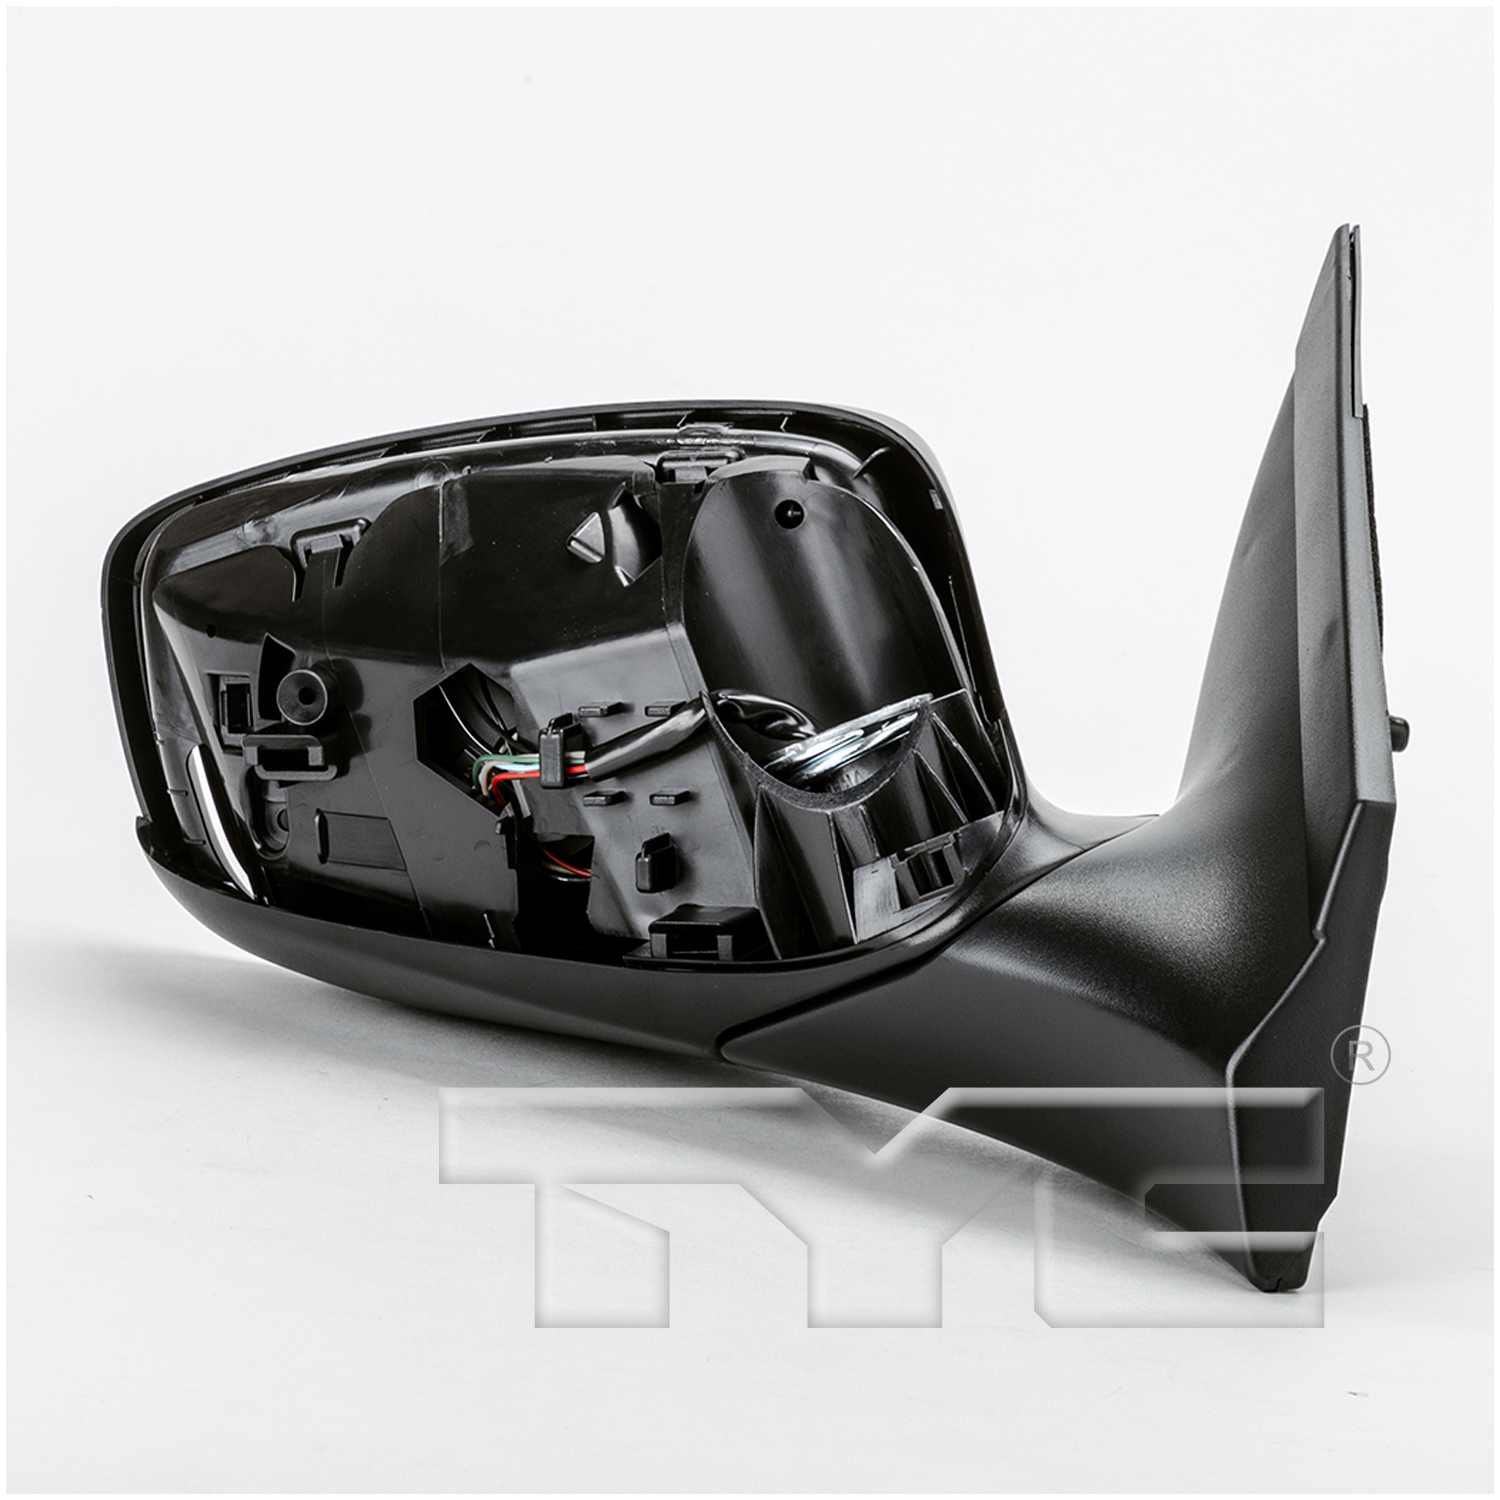 Aftermarket MIRRORS for HYUNDAI - ACCENT, ACCENT,12-16,RT Mirror outside rear view